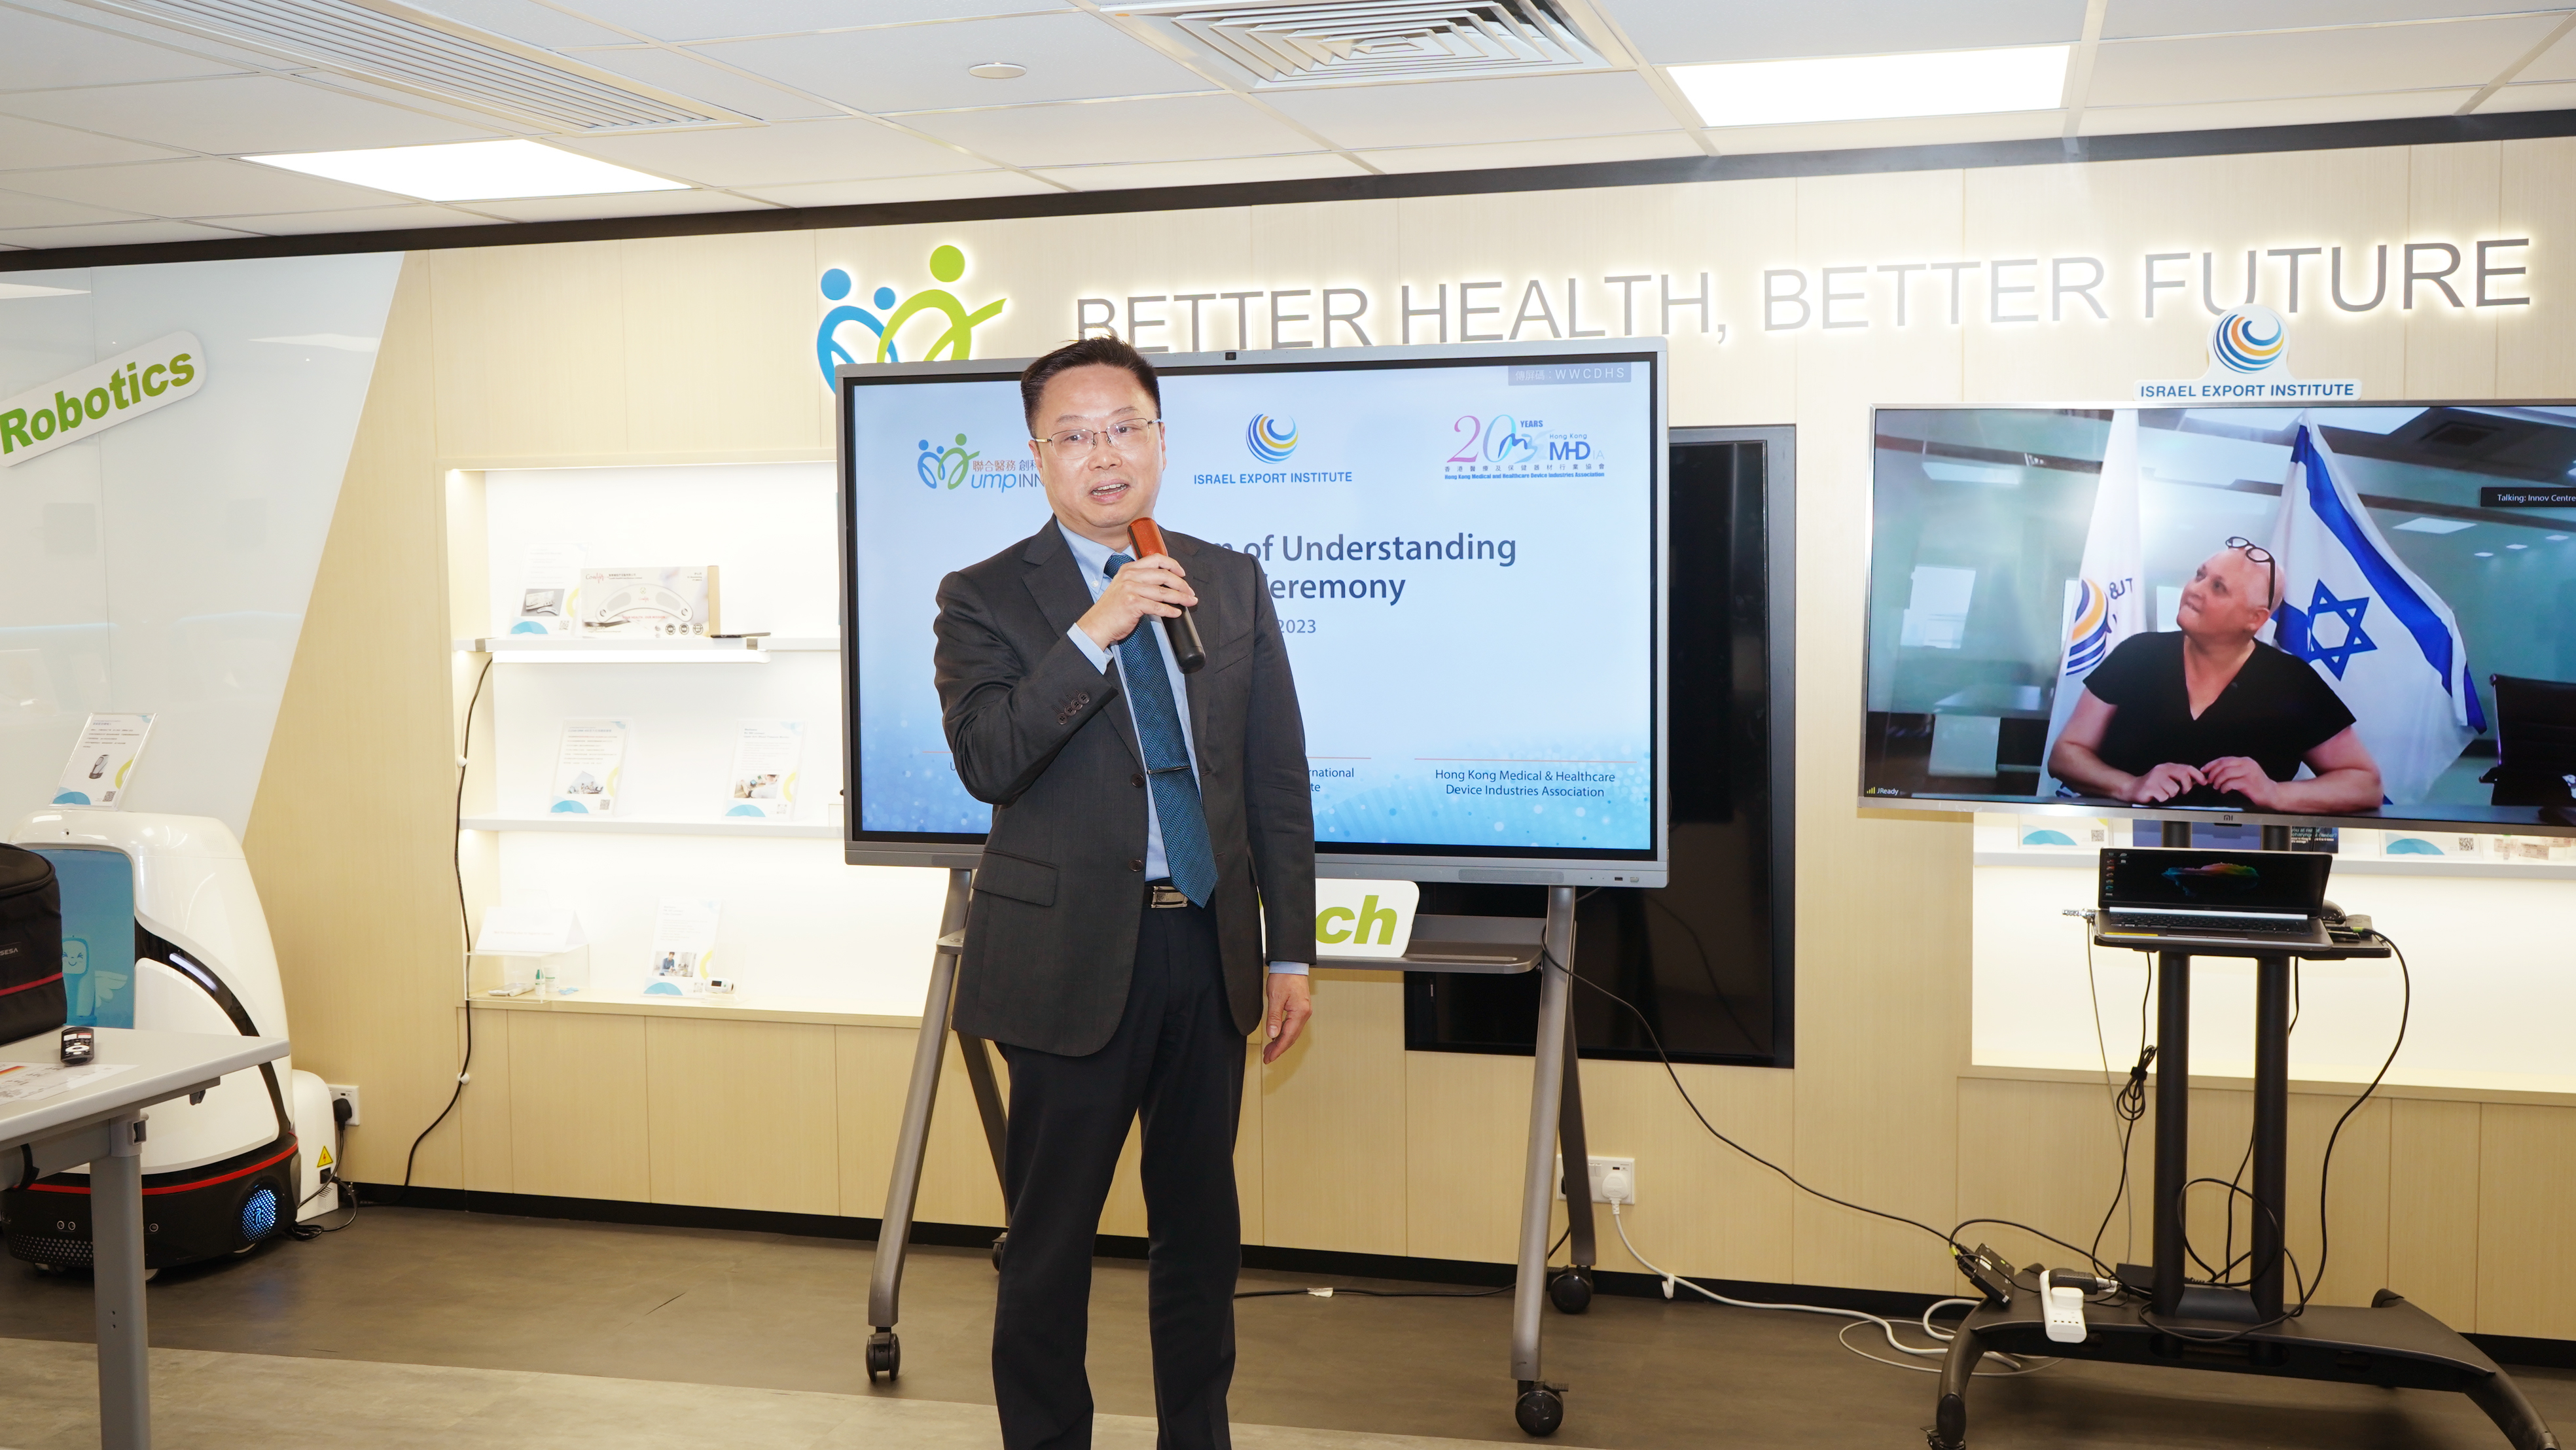 Ronnie LI, Director at UMP Healthcare Innov Centre, delivered his remarks